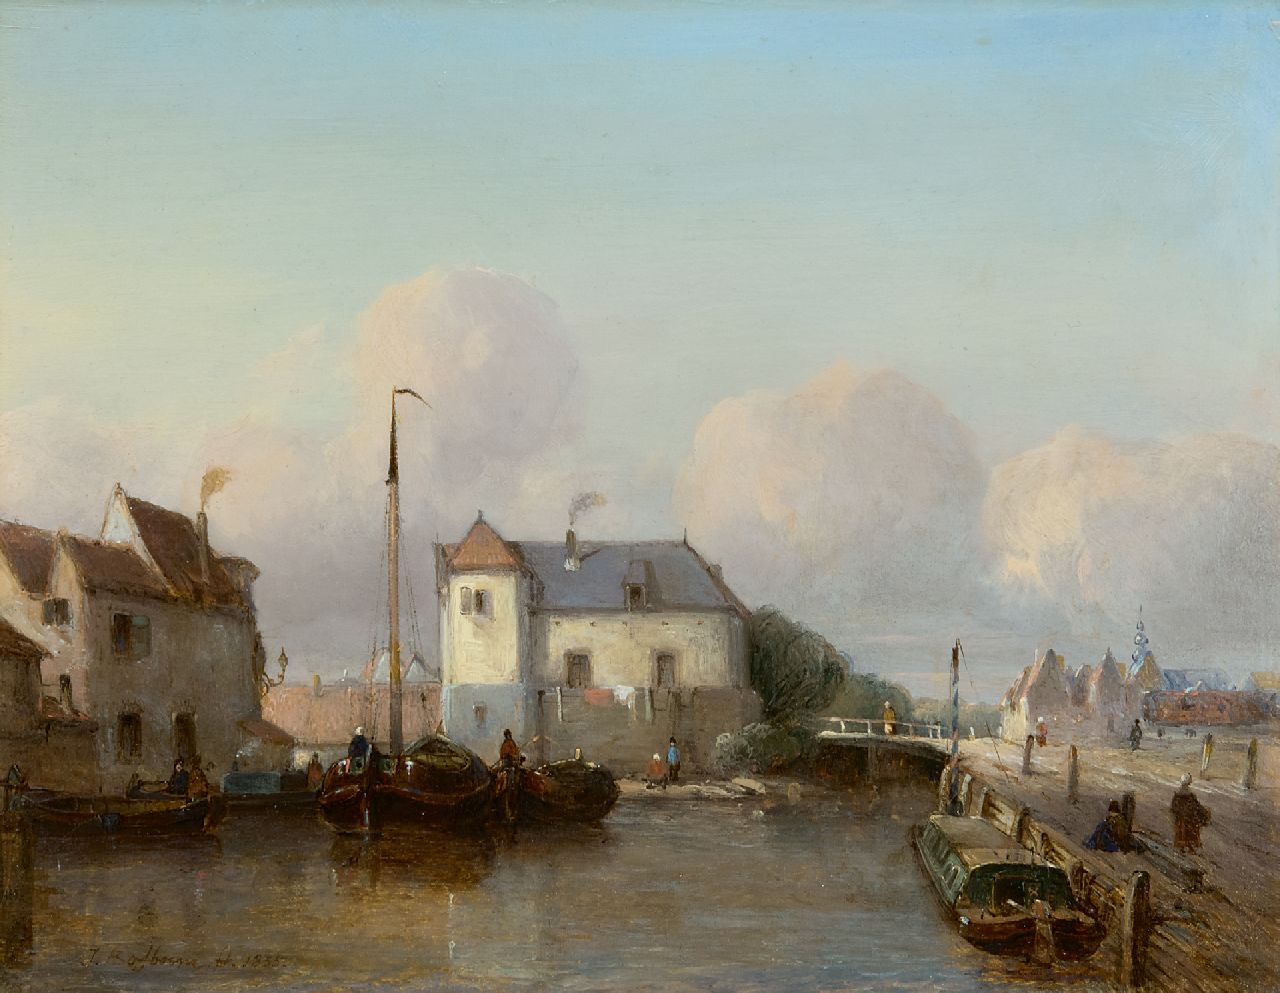 Bosboom J.  | Johannes Bosboom | Paintings offered for sale | A Dutch inner port, oil on panel 24.8 x 31.7 cm, signed l.l. and dated 1835